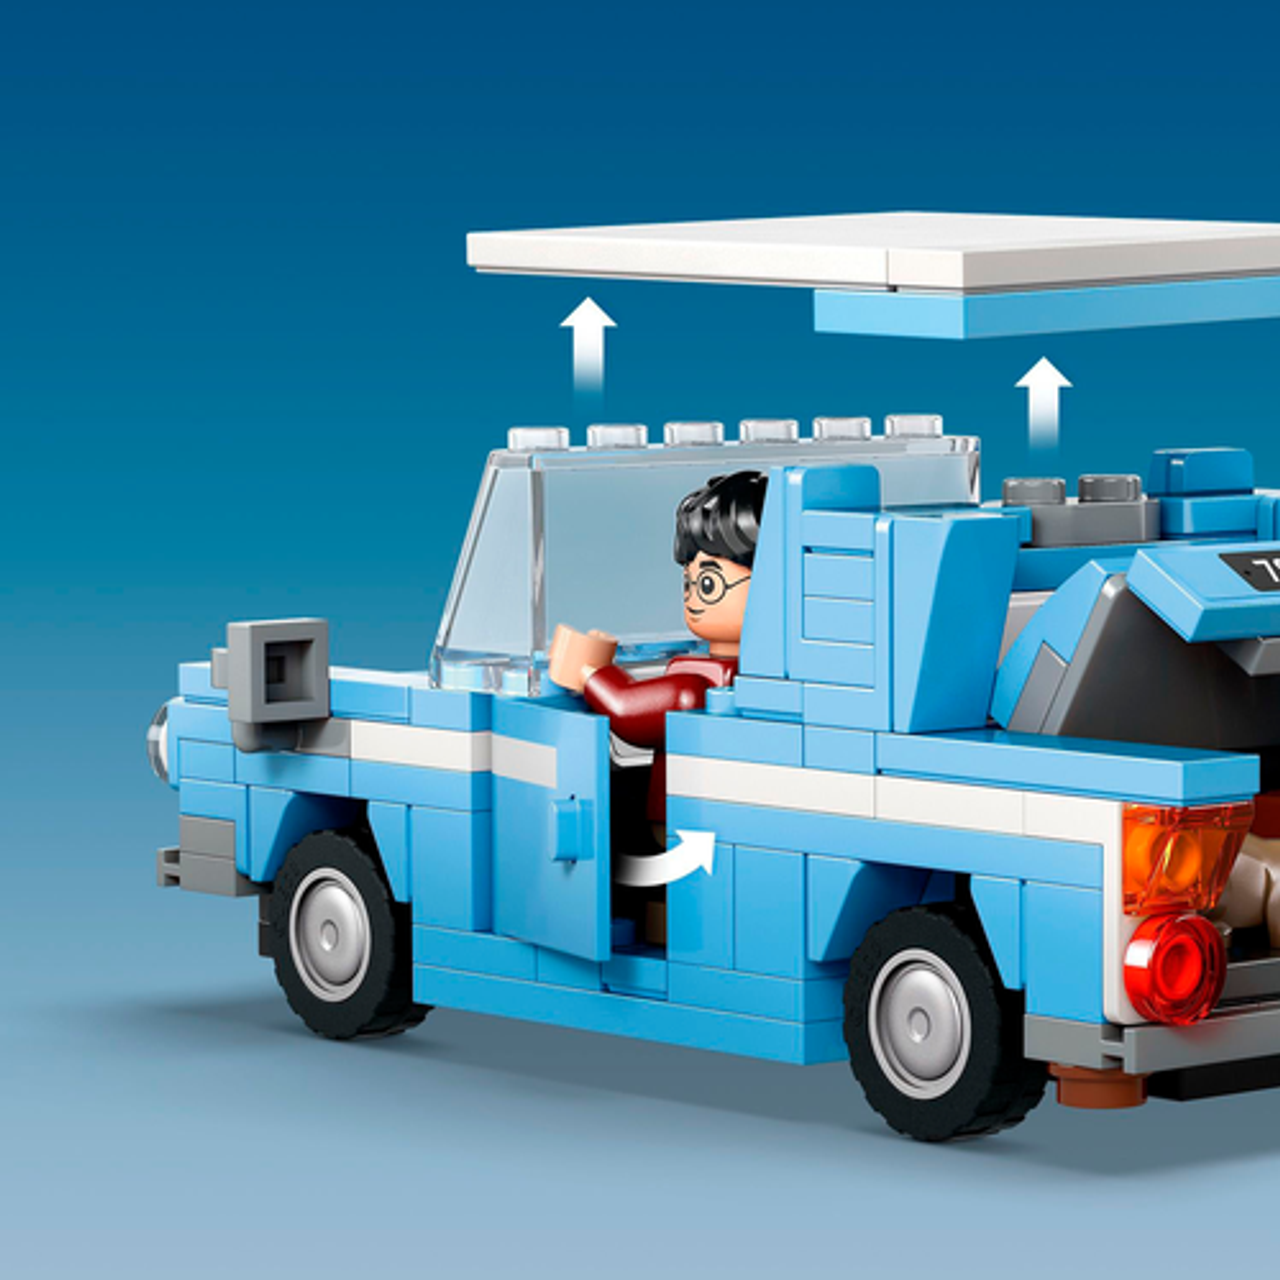 LEGO - Harry Potter Flying Ford Anglia Car Toy 76424